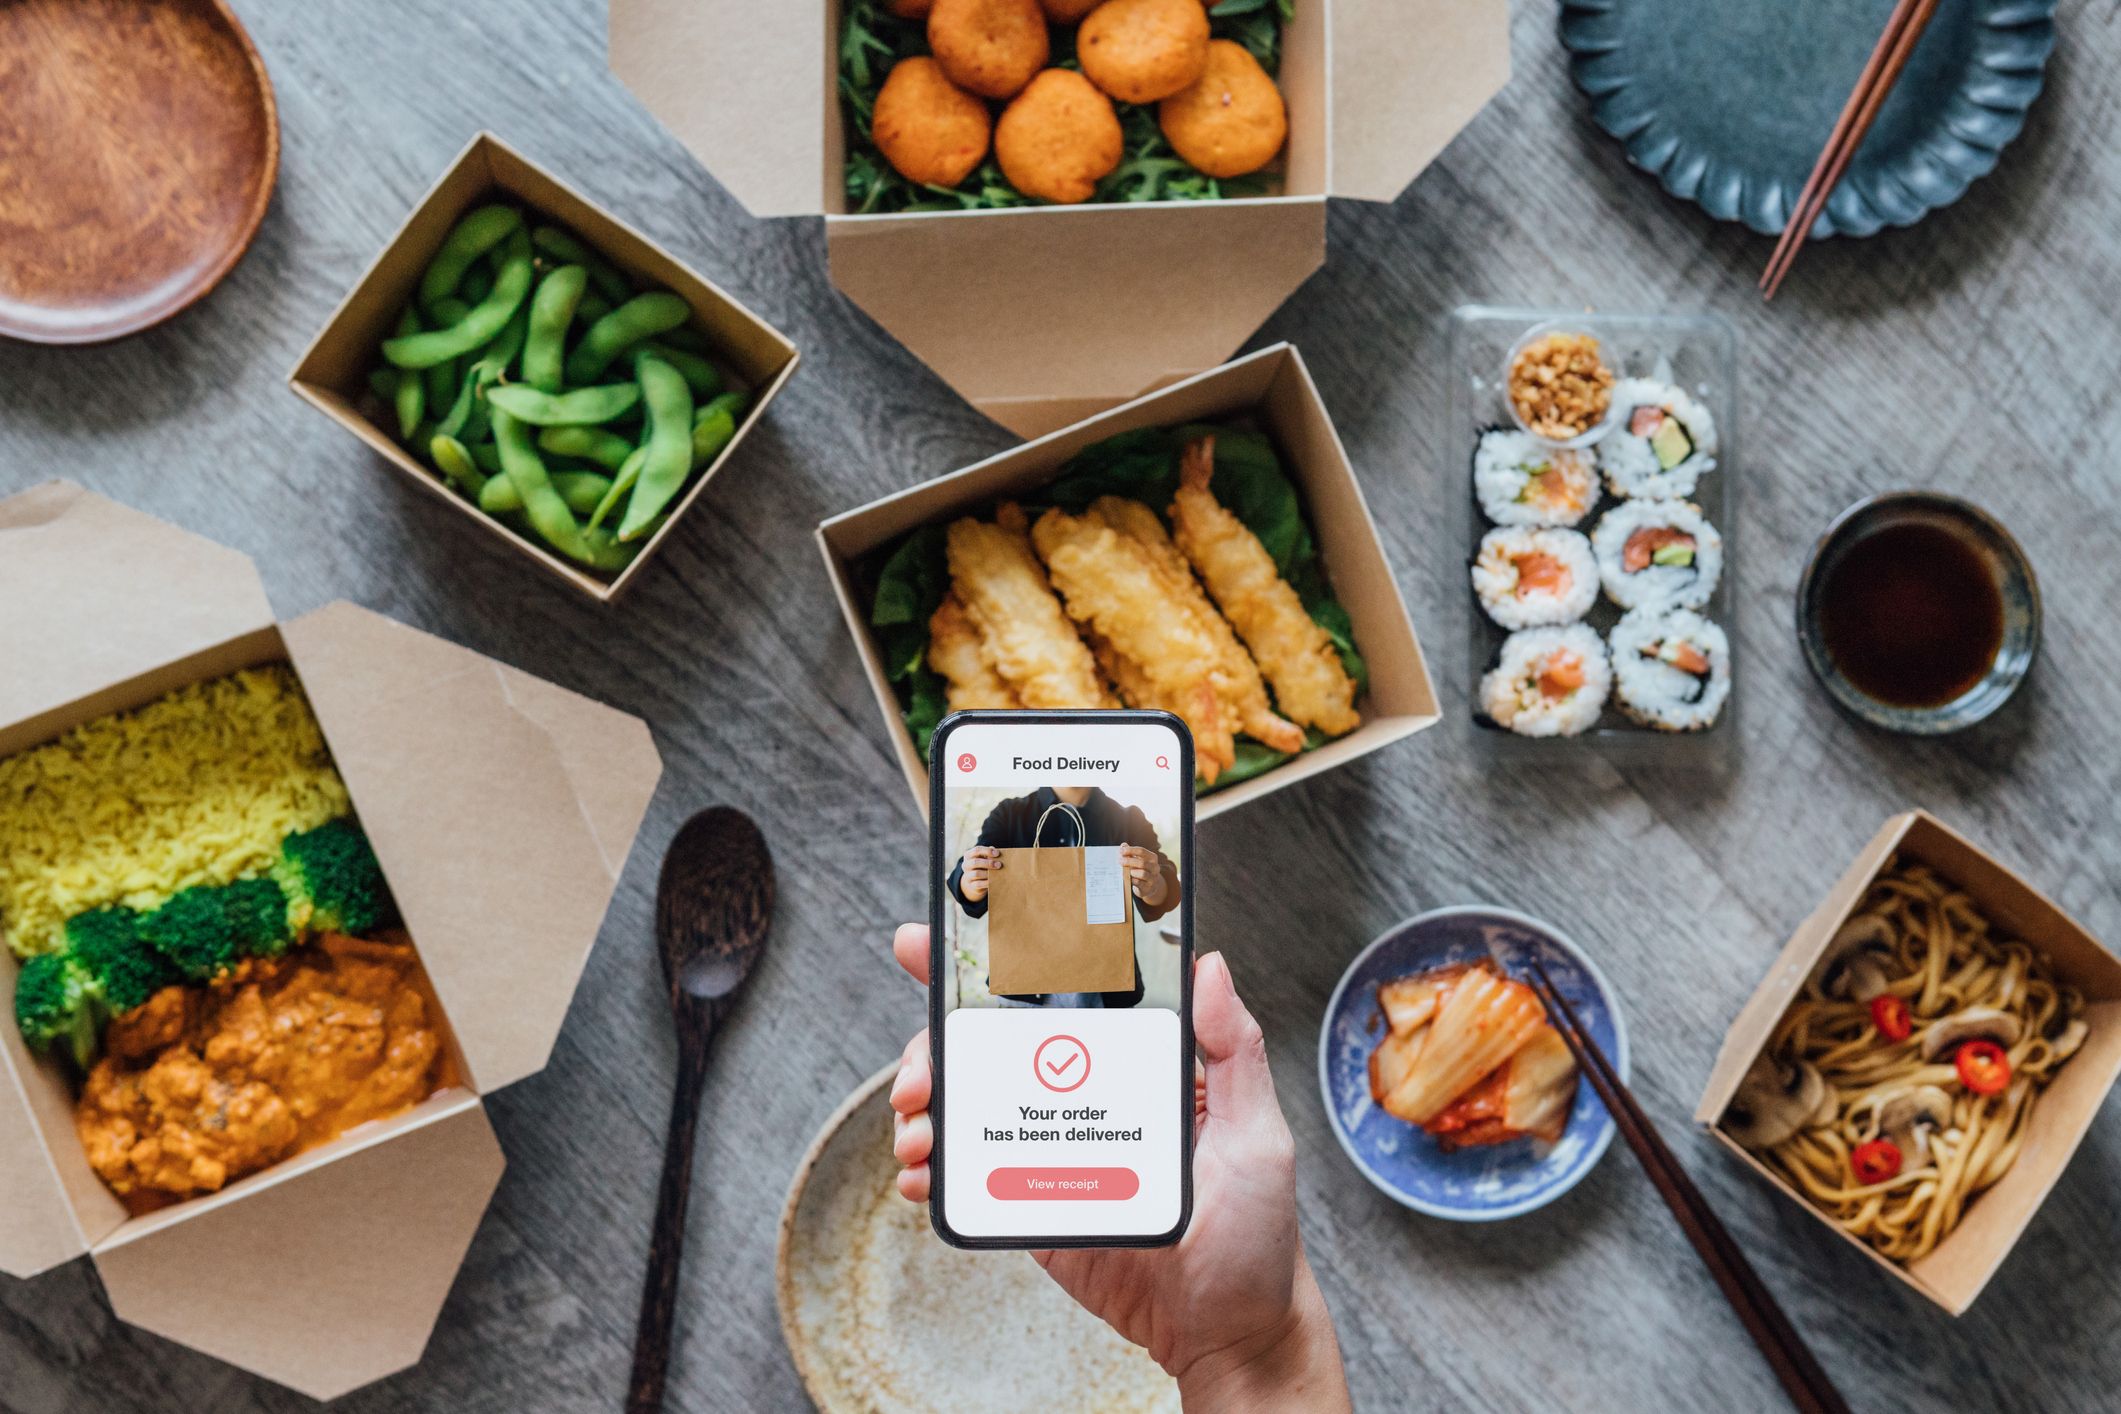 Google Food Ordering For Restaurants - Delivery & Takeout